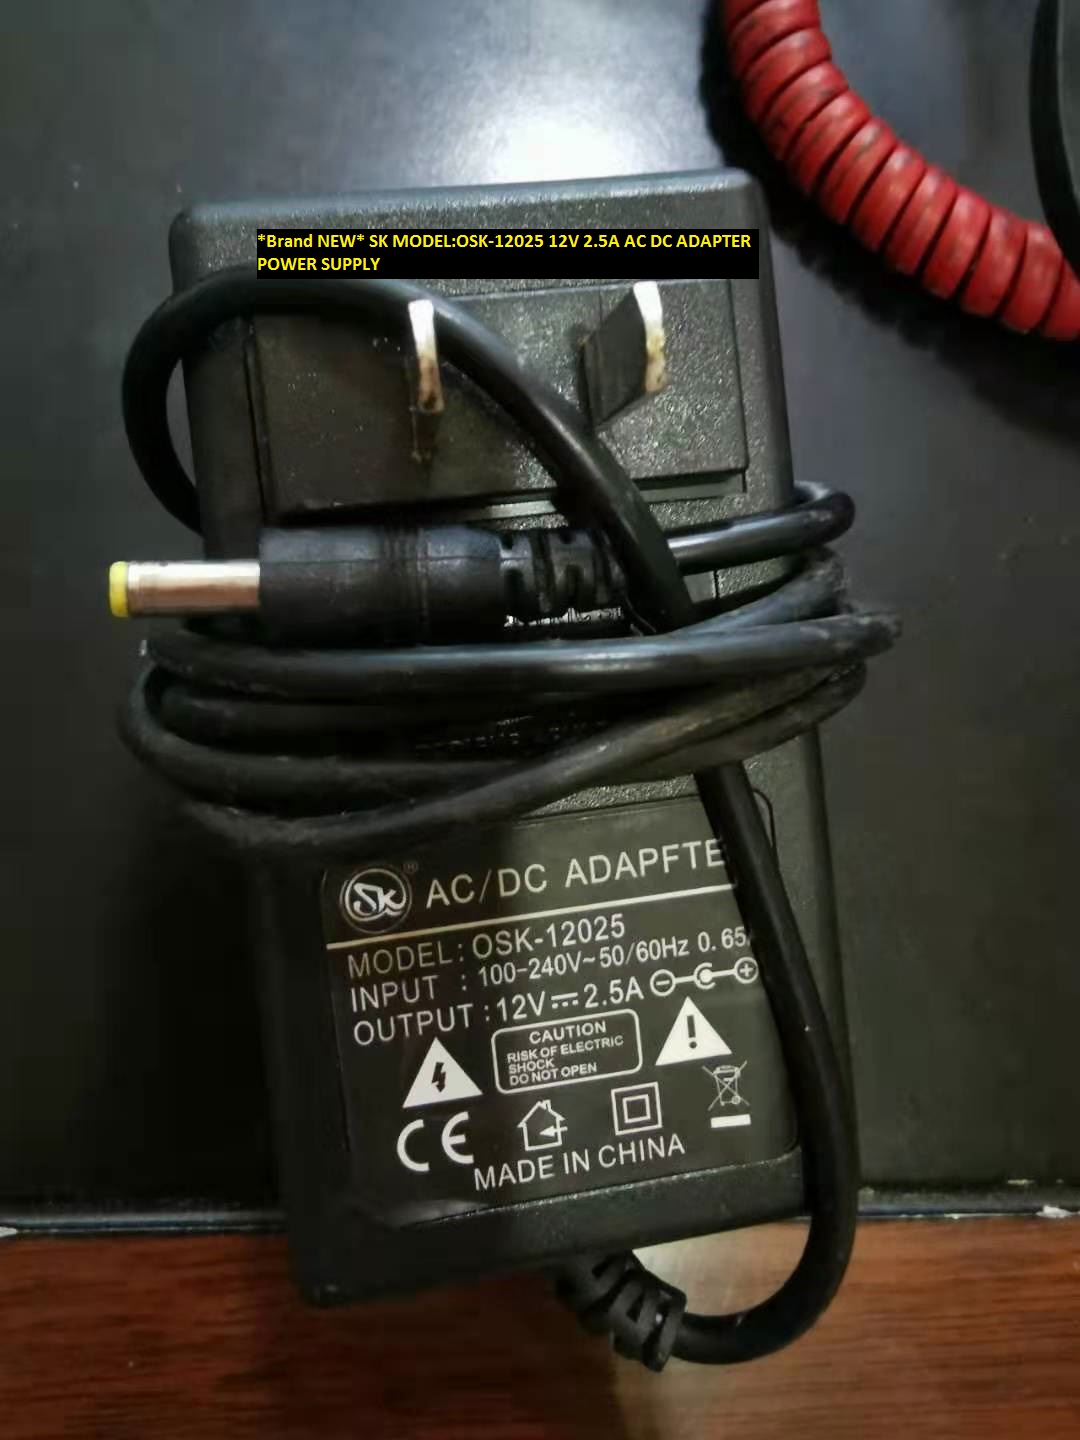 *Brand NEW* AC DC ADAPTER 12V 2.5A SK MODEL:OSK-12025 POWER SUPPLY - Click Image to Close